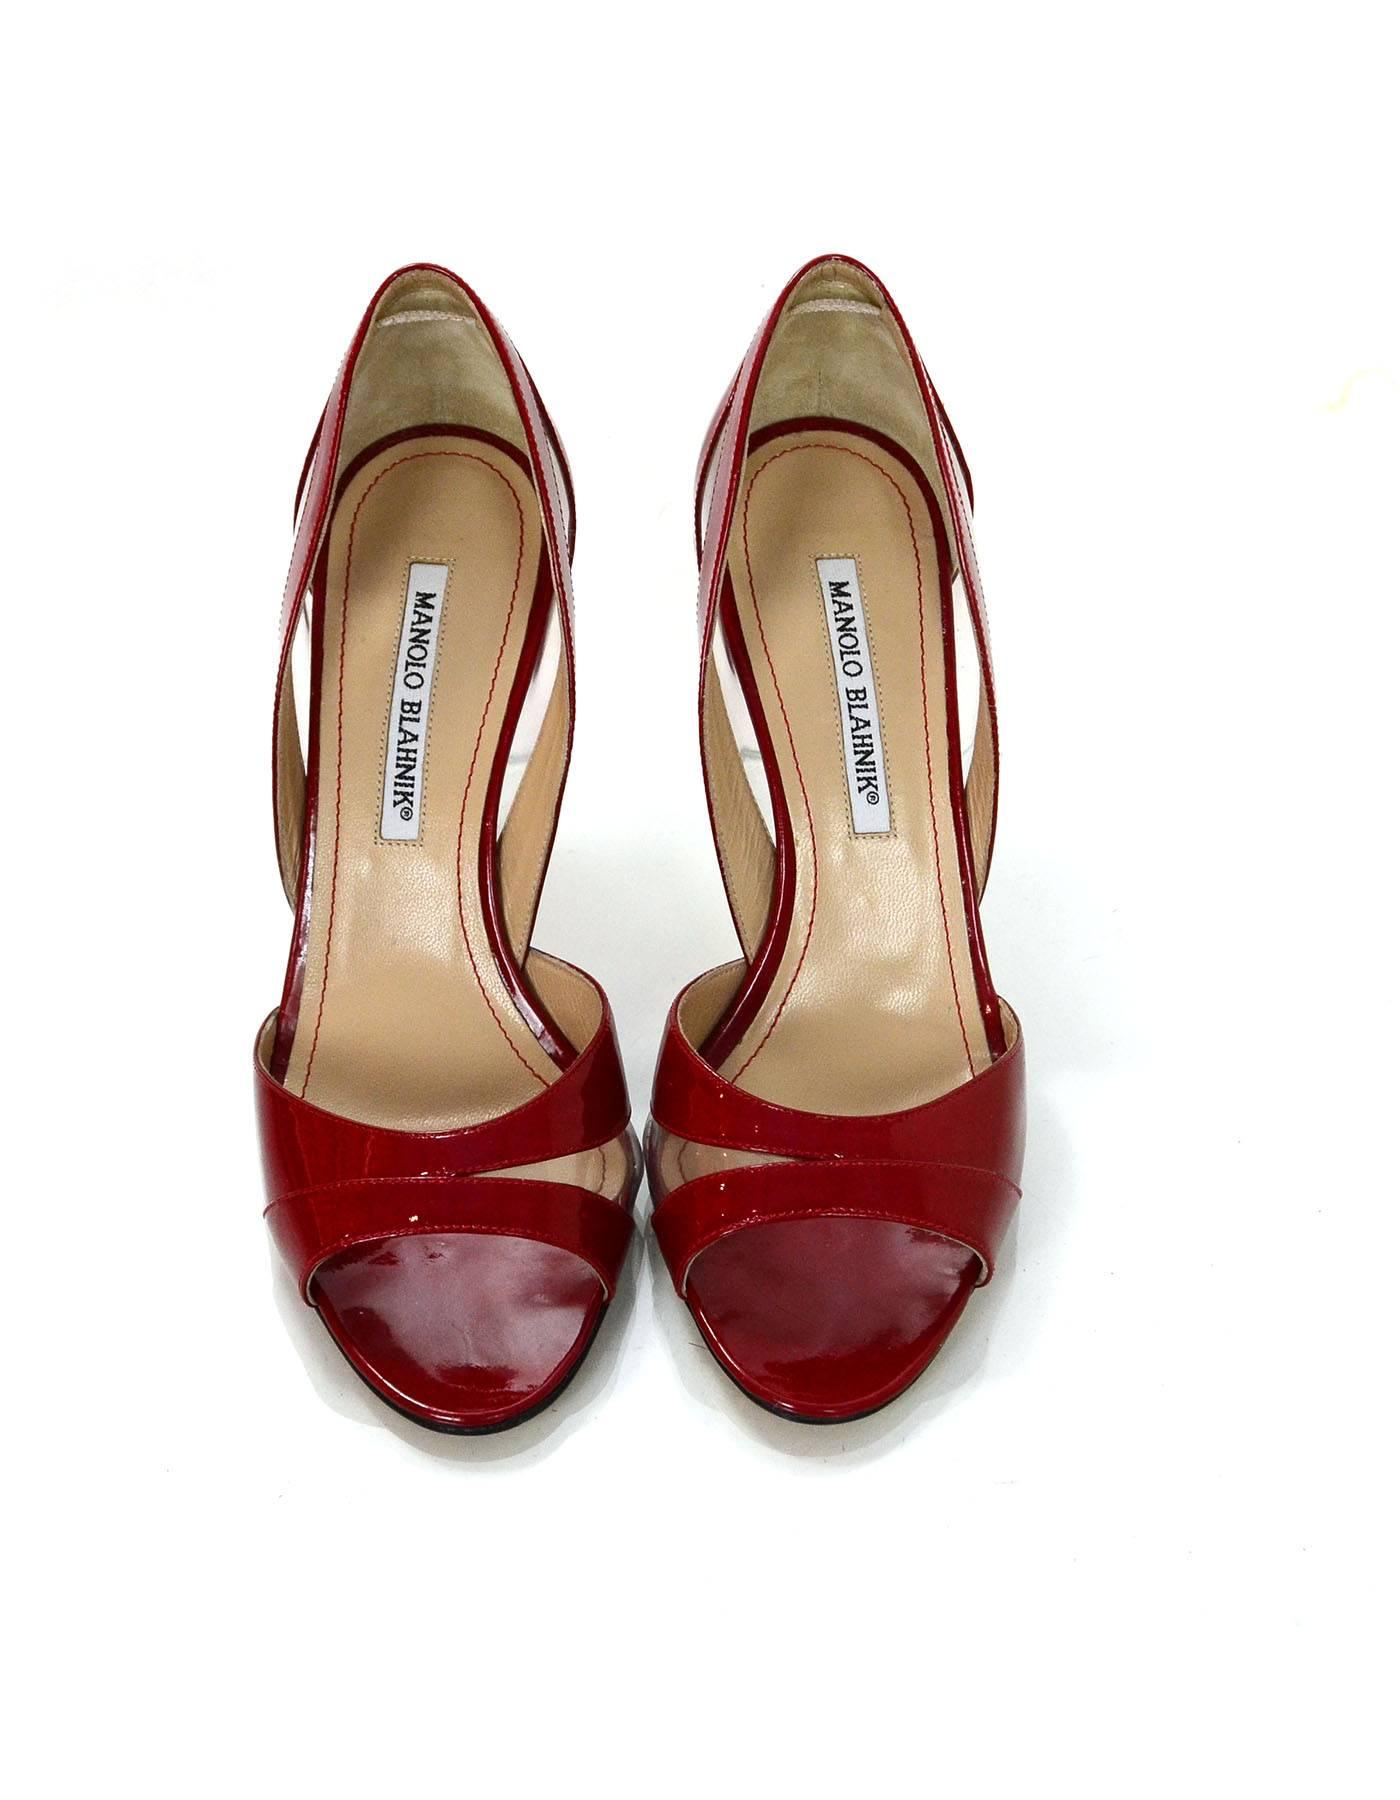 Brown Manolo Blahnik Red Patent Open-Toe d'Orsay Pumps Sz 38 with Box